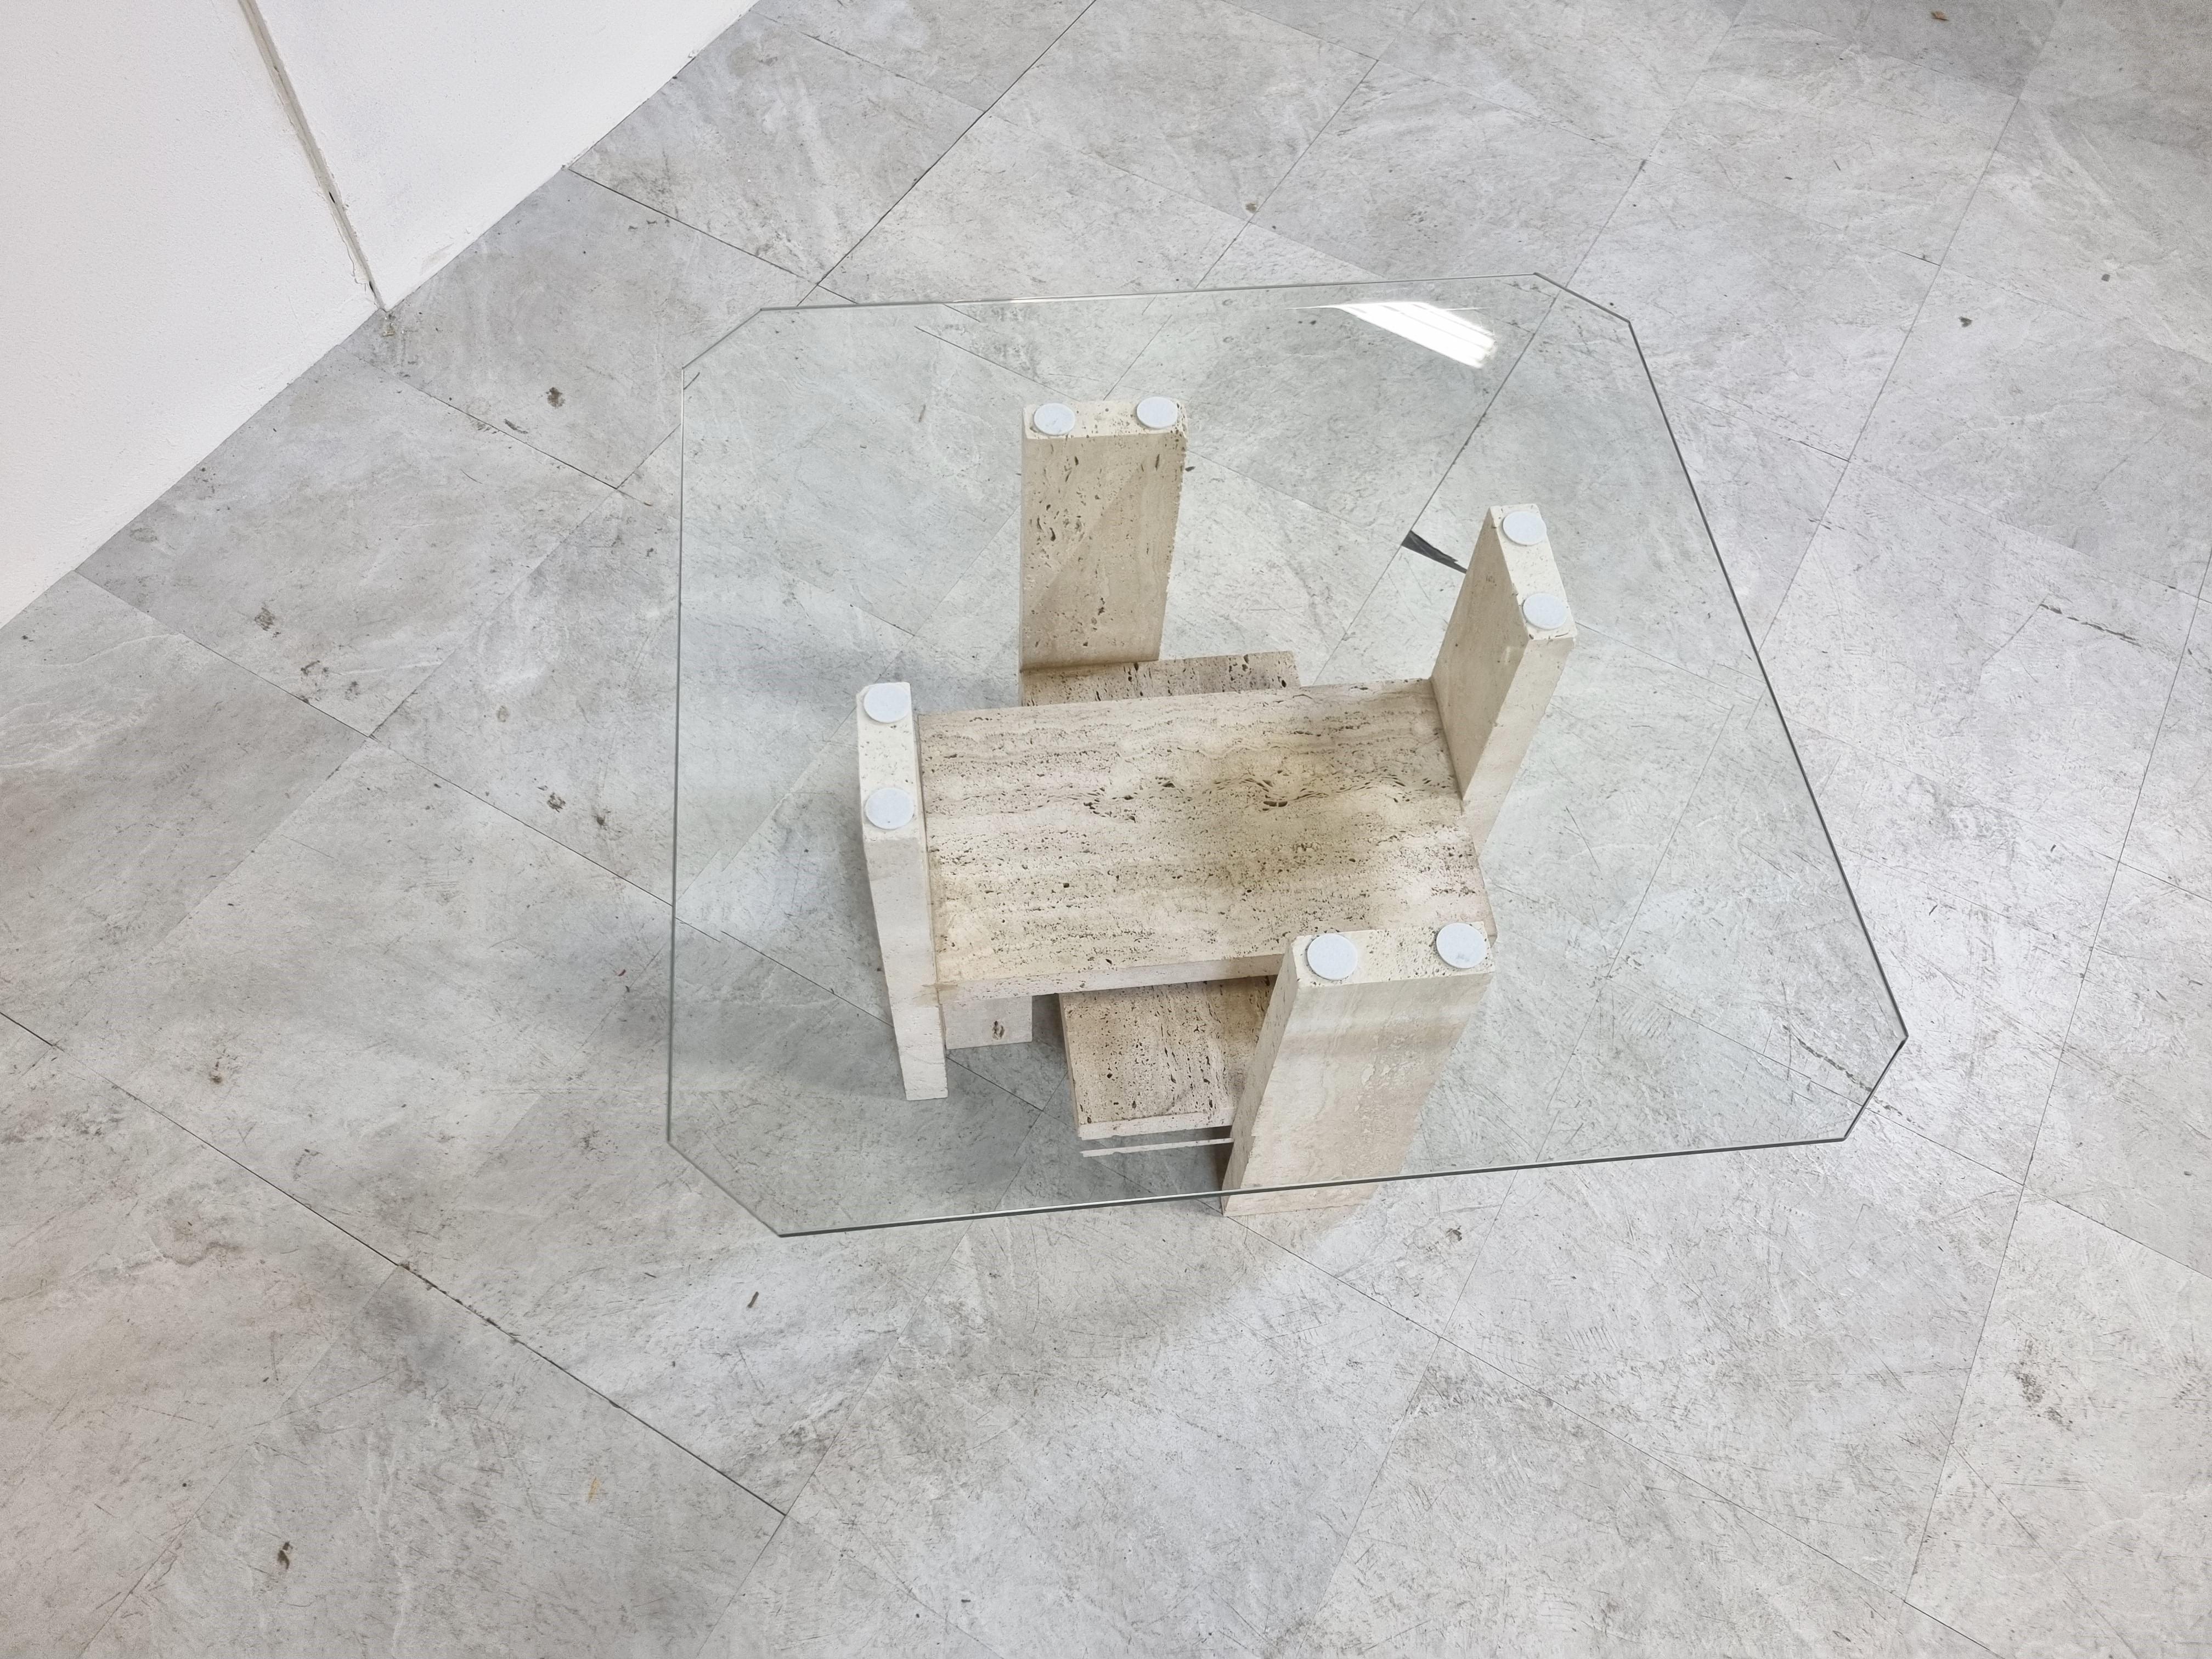 Architectural coffee table made from a solid travertine base and with a beveled glass top.

The table was designed by Willy Ballez.

The modern look/design mixes well with nowadays interiors, especially with the light color of the